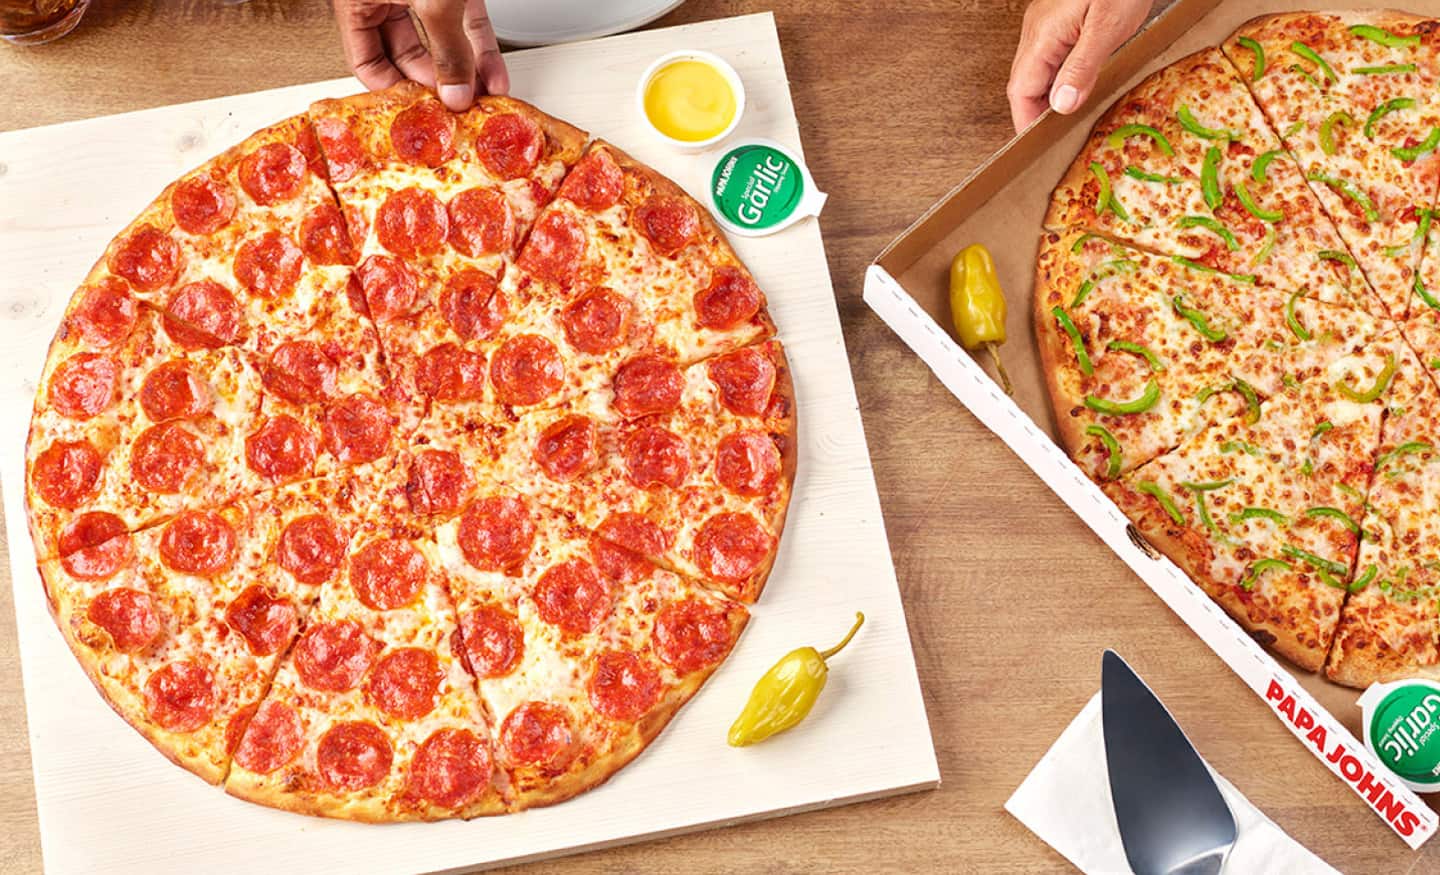 Two pizzas side by side